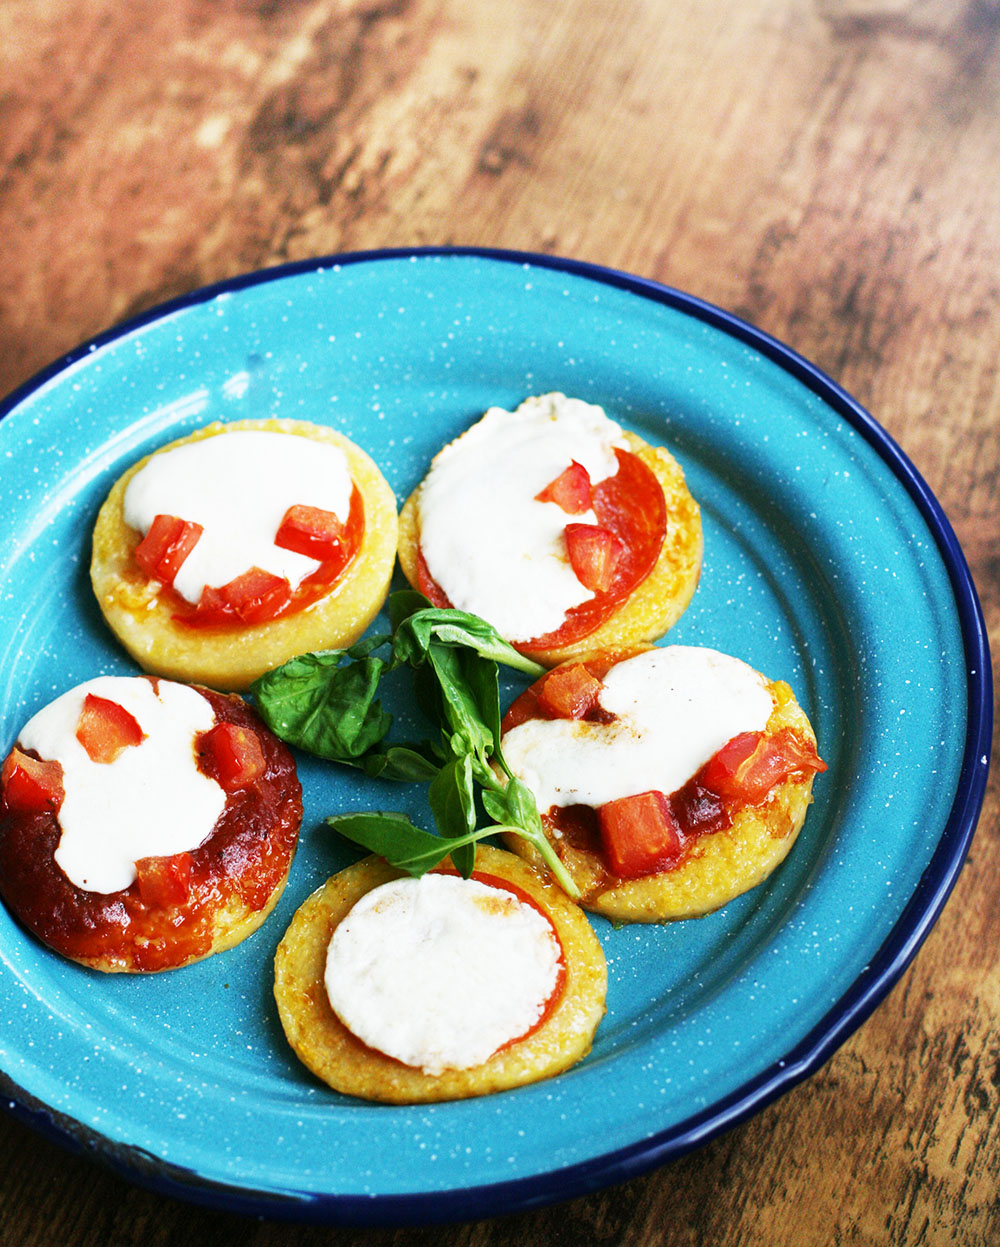 Polenta pizza bites: A great snack, appetizer or main course, with a polenta-based pizza crust.